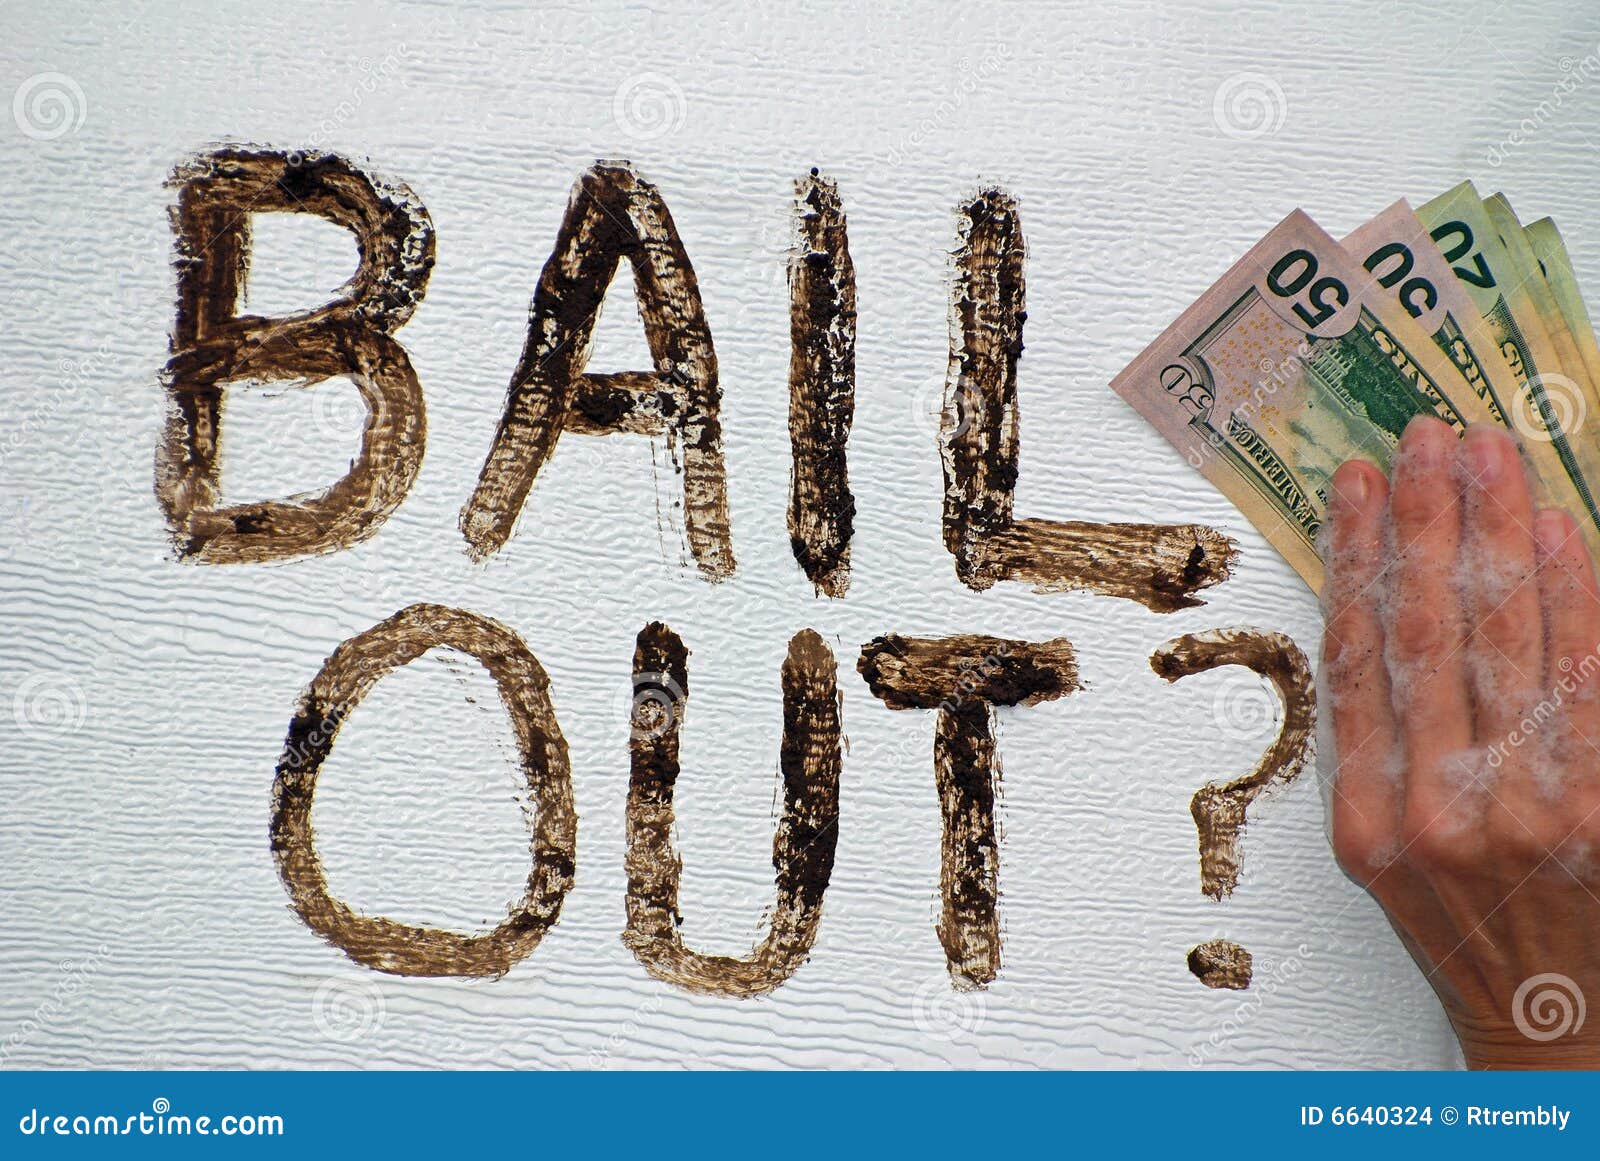 bail-out-stock-images-image-6640324